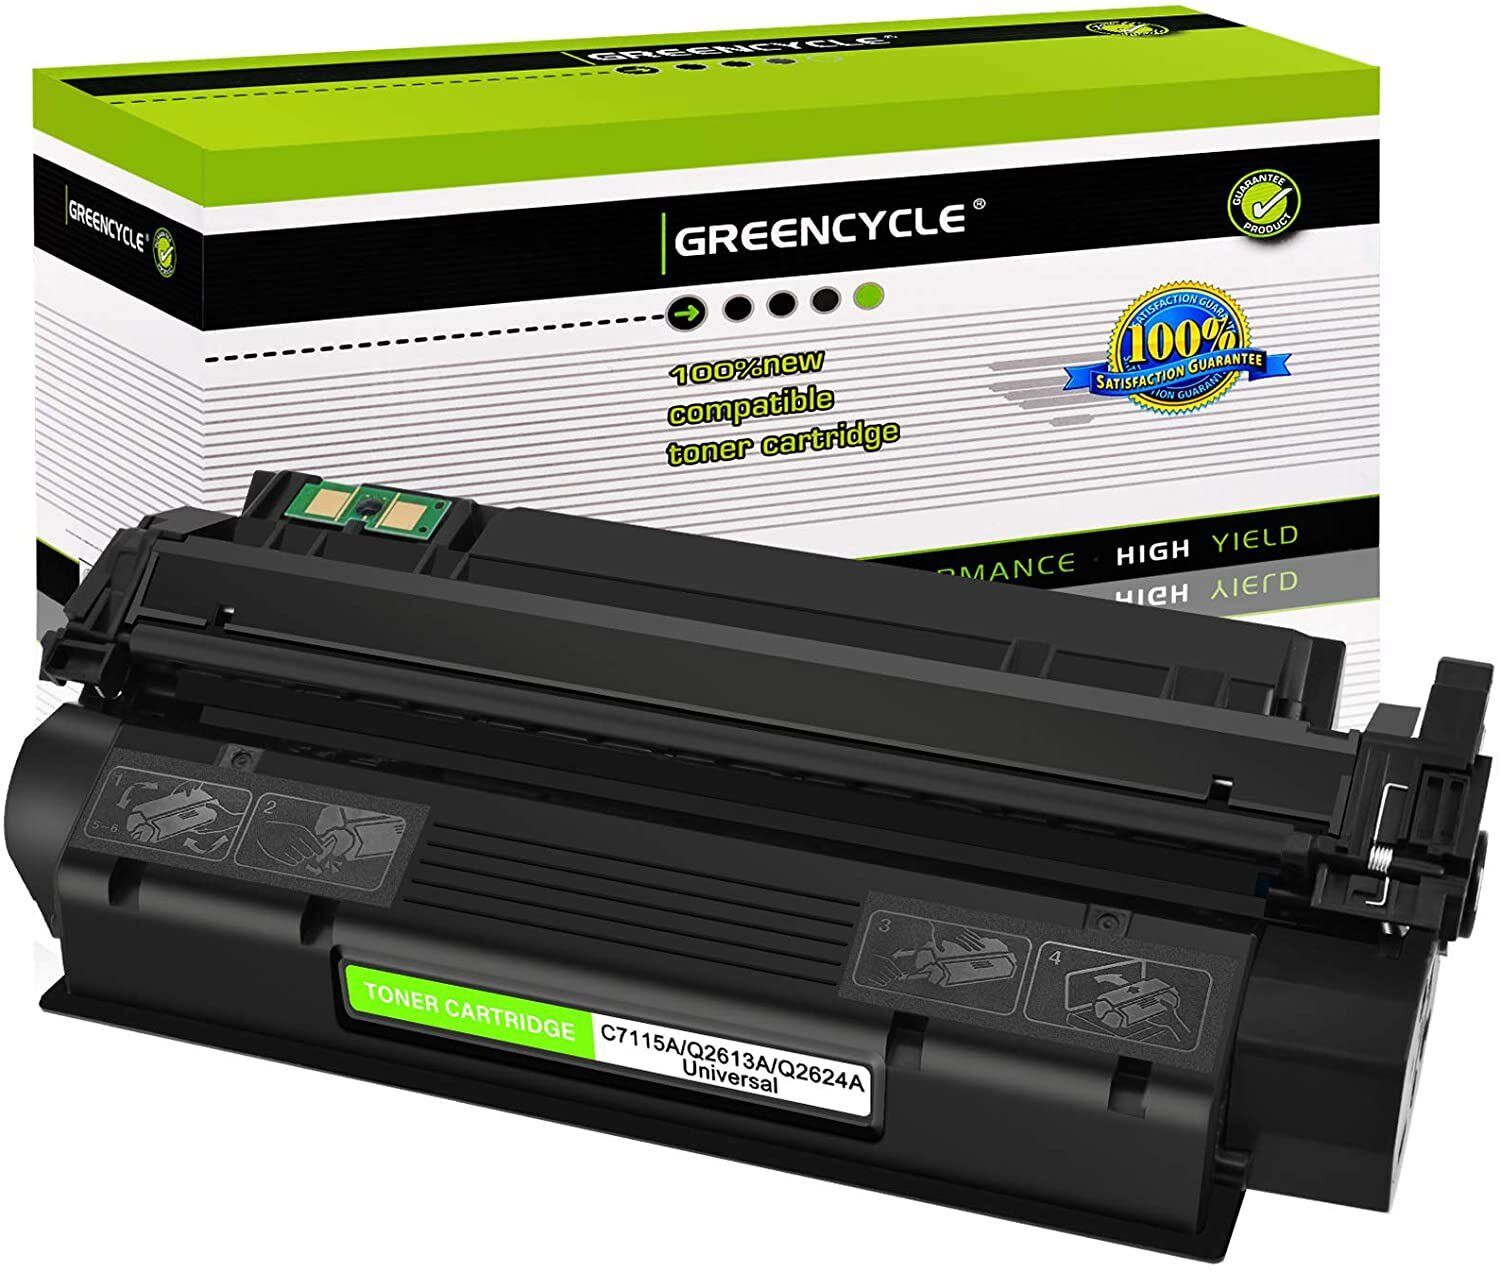 GREENCYCLE C7115A 15A Toner  Cartridge for HP Laserjet 1000 1005 1200 1220 3300